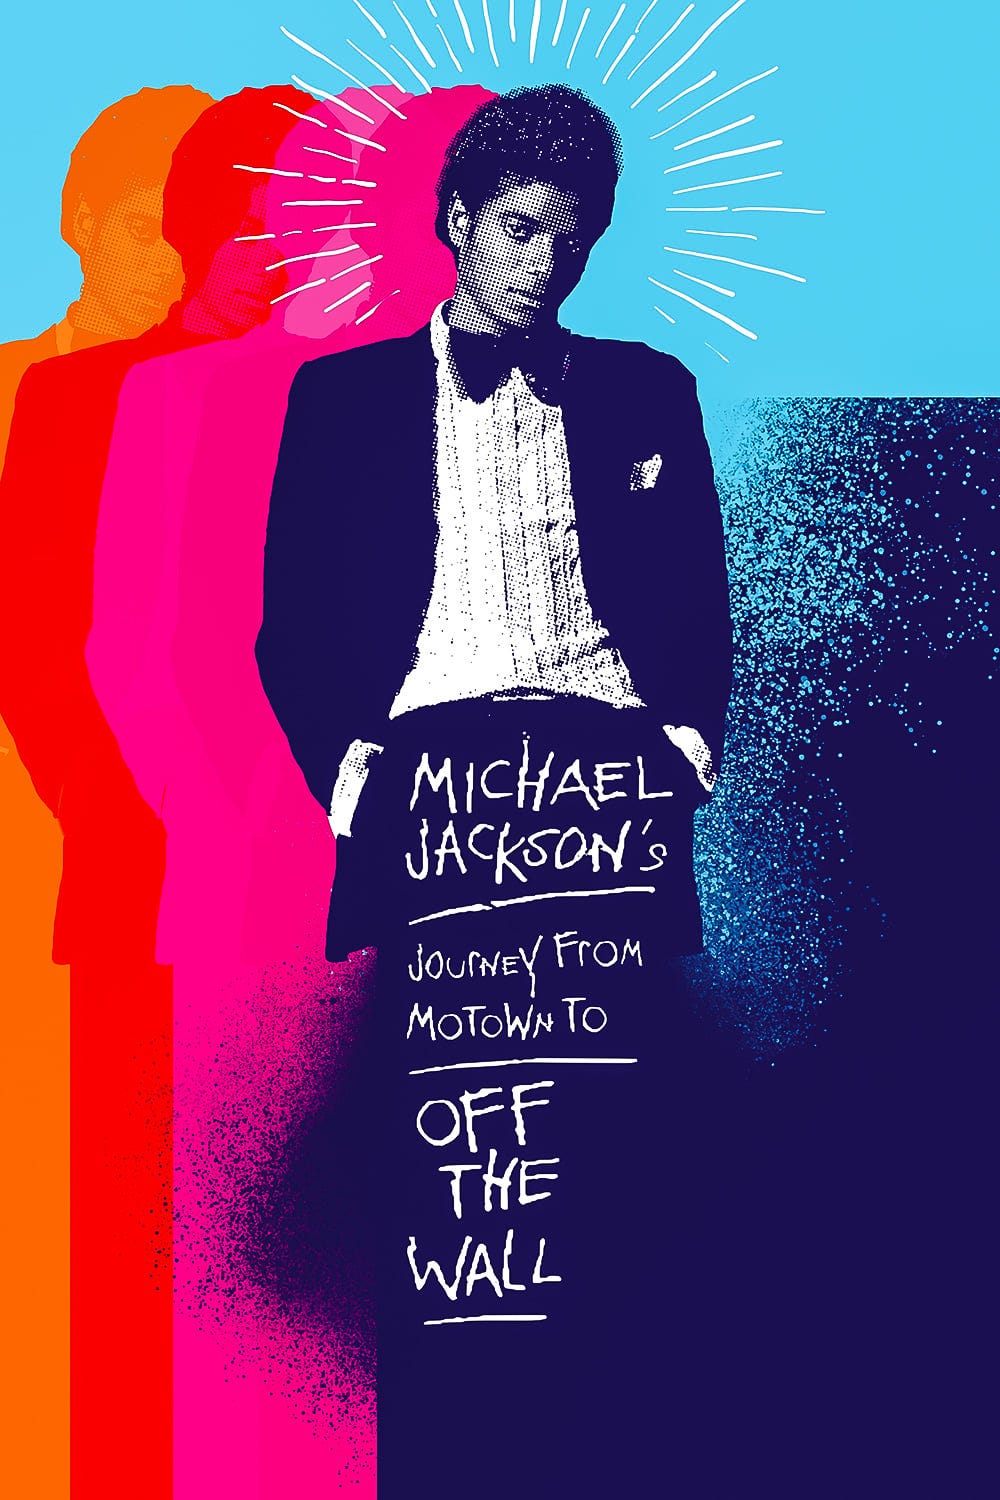 Michael Jackson's Journey from Motown to Off the Wall (2016) | Poster